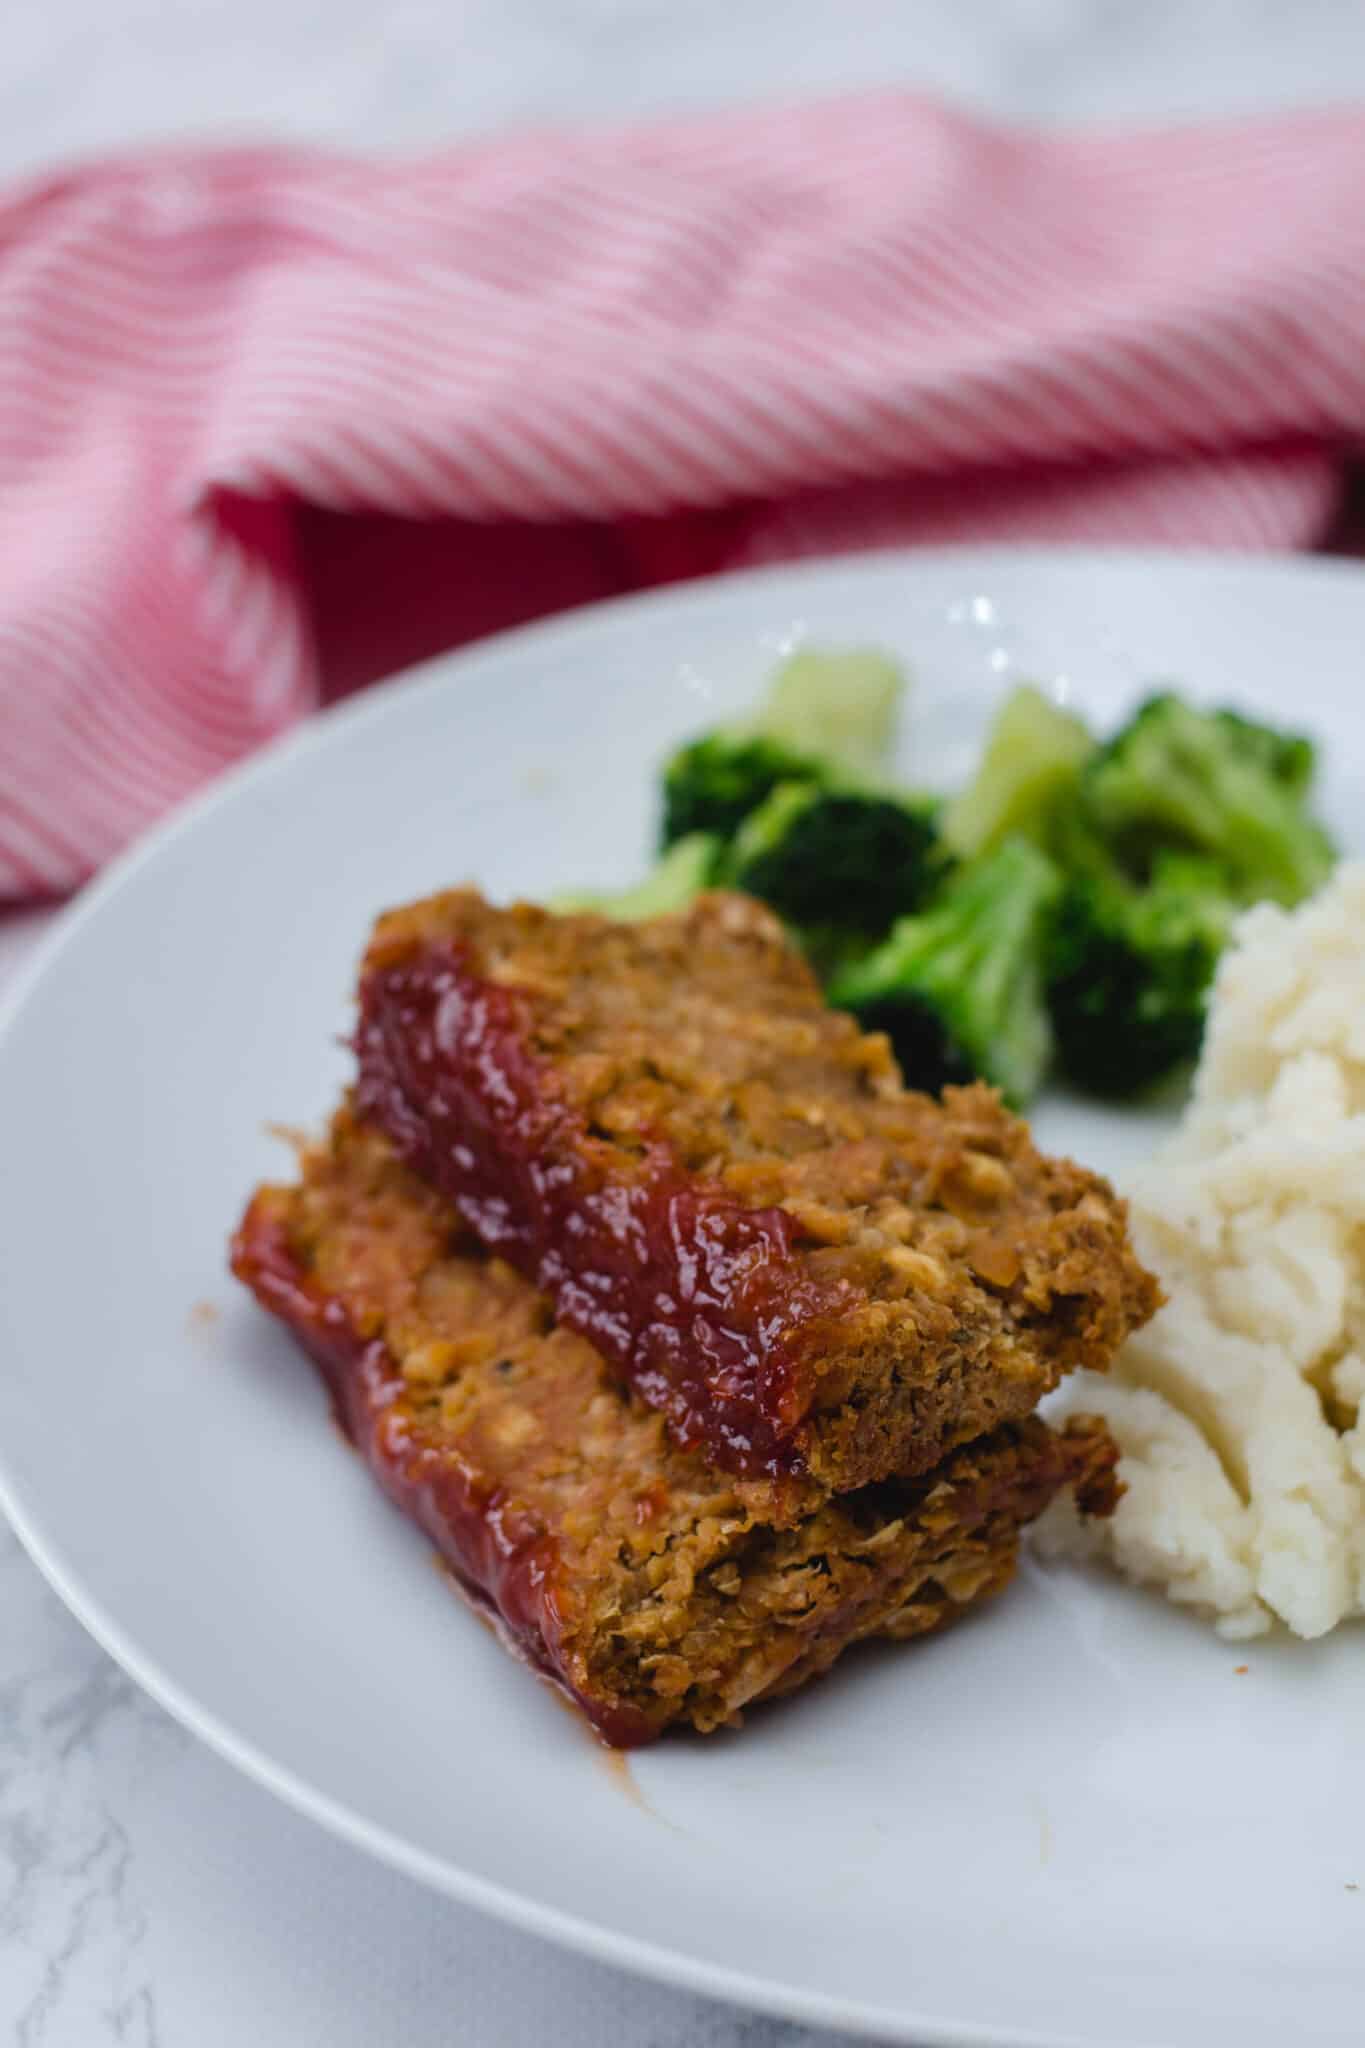 Beans and Walnuts Vegan Meatloaf